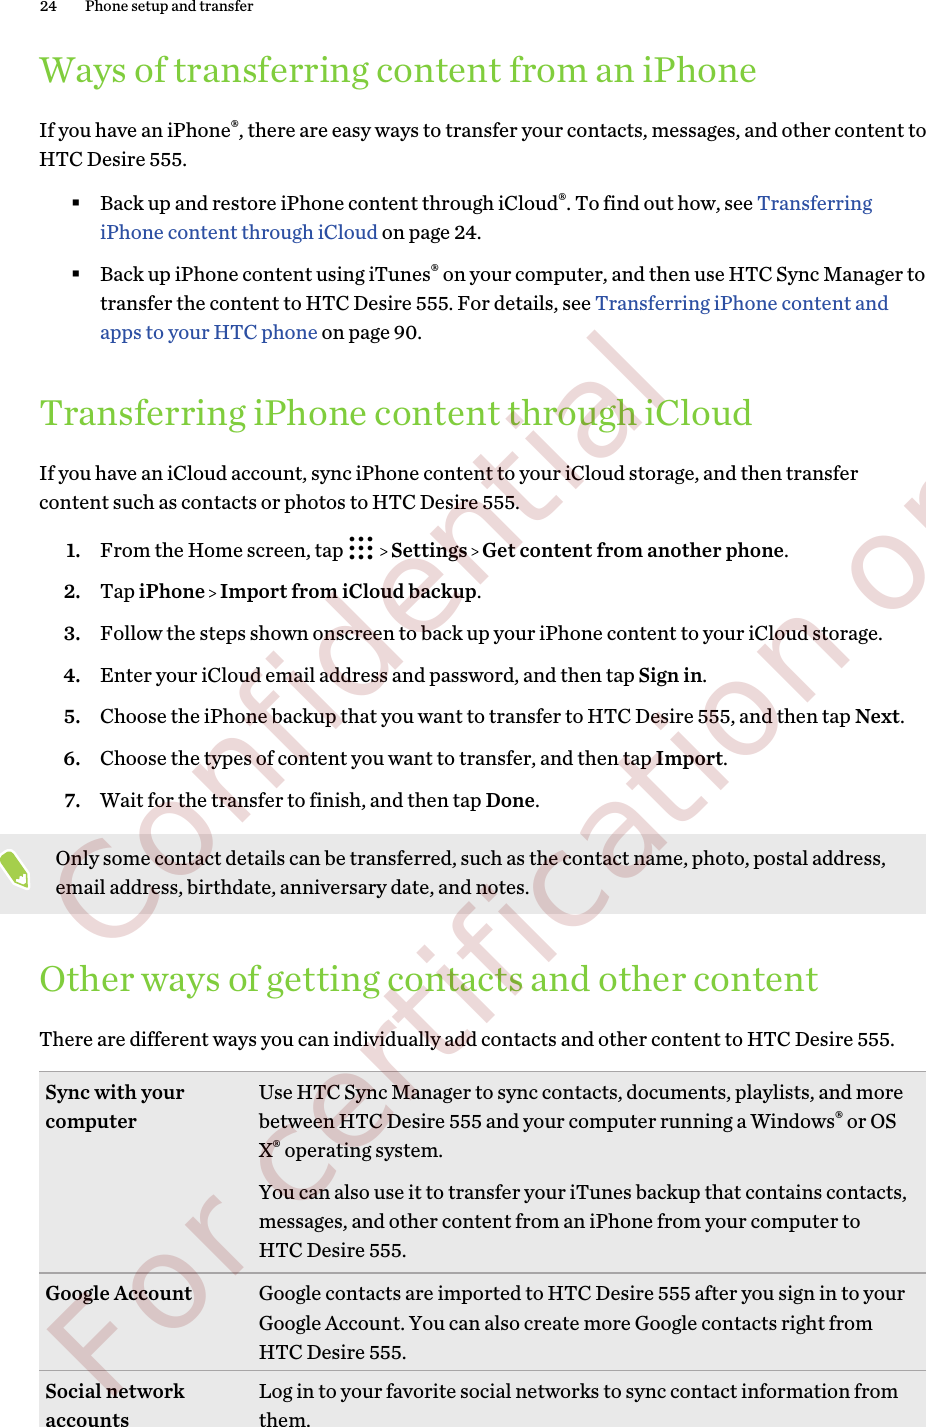 Ways of transferring content from an iPhoneIf you have an iPhone®, there are easy ways to transfer your contacts, messages, and other content toHTC Desire 555.§Back up and restore iPhone content through iCloud®. To find out how, see TransferringiPhone content through iCloud on page 24.§Back up iPhone content using iTunes® on your computer, and then use HTC Sync Manager totransfer the content to HTC Desire 555. For details, see Transferring iPhone content andapps to your HTC phone on page 90.Transferring iPhone content through iCloudIf you have an iCloud account, sync iPhone content to your iCloud storage, and then transfercontent such as contacts or photos to HTC Desire 555.1. From the Home screen, tap     Settings   Get content from another phone.2. Tap iPhone   Import from iCloud backup.3. Follow the steps shown onscreen to back up your iPhone content to your iCloud storage.4. Enter your iCloud email address and password, and then tap Sign in.5. Choose the iPhone backup that you want to transfer to HTC Desire 555, and then tap Next.6. Choose the types of content you want to transfer, and then tap Import.7. Wait for the transfer to finish, and then tap Done.Only some contact details can be transferred, such as the contact name, photo, postal address,email address, birthdate, anniversary date, and notes.Other ways of getting contacts and other contentThere are different ways you can individually add contacts and other content to HTC Desire 555.Sync with yourcomputer Use HTC Sync Manager to sync contacts, documents, playlists, and morebetween HTC Desire 555 and your computer running a Windows® or OSX® operating system.You can also use it to transfer your iTunes backup that contains contacts,messages, and other content from an iPhone from your computer toHTC Desire 555.Google Account Google contacts are imported to HTC Desire 555 after you sign in to yourGoogle Account. You can also create more Google contacts right fromHTC Desire 555.Social networkaccounts Log in to your favorite social networks to sync contact information fromthem.24 Phone setup and transfer        Confidential  For certification only